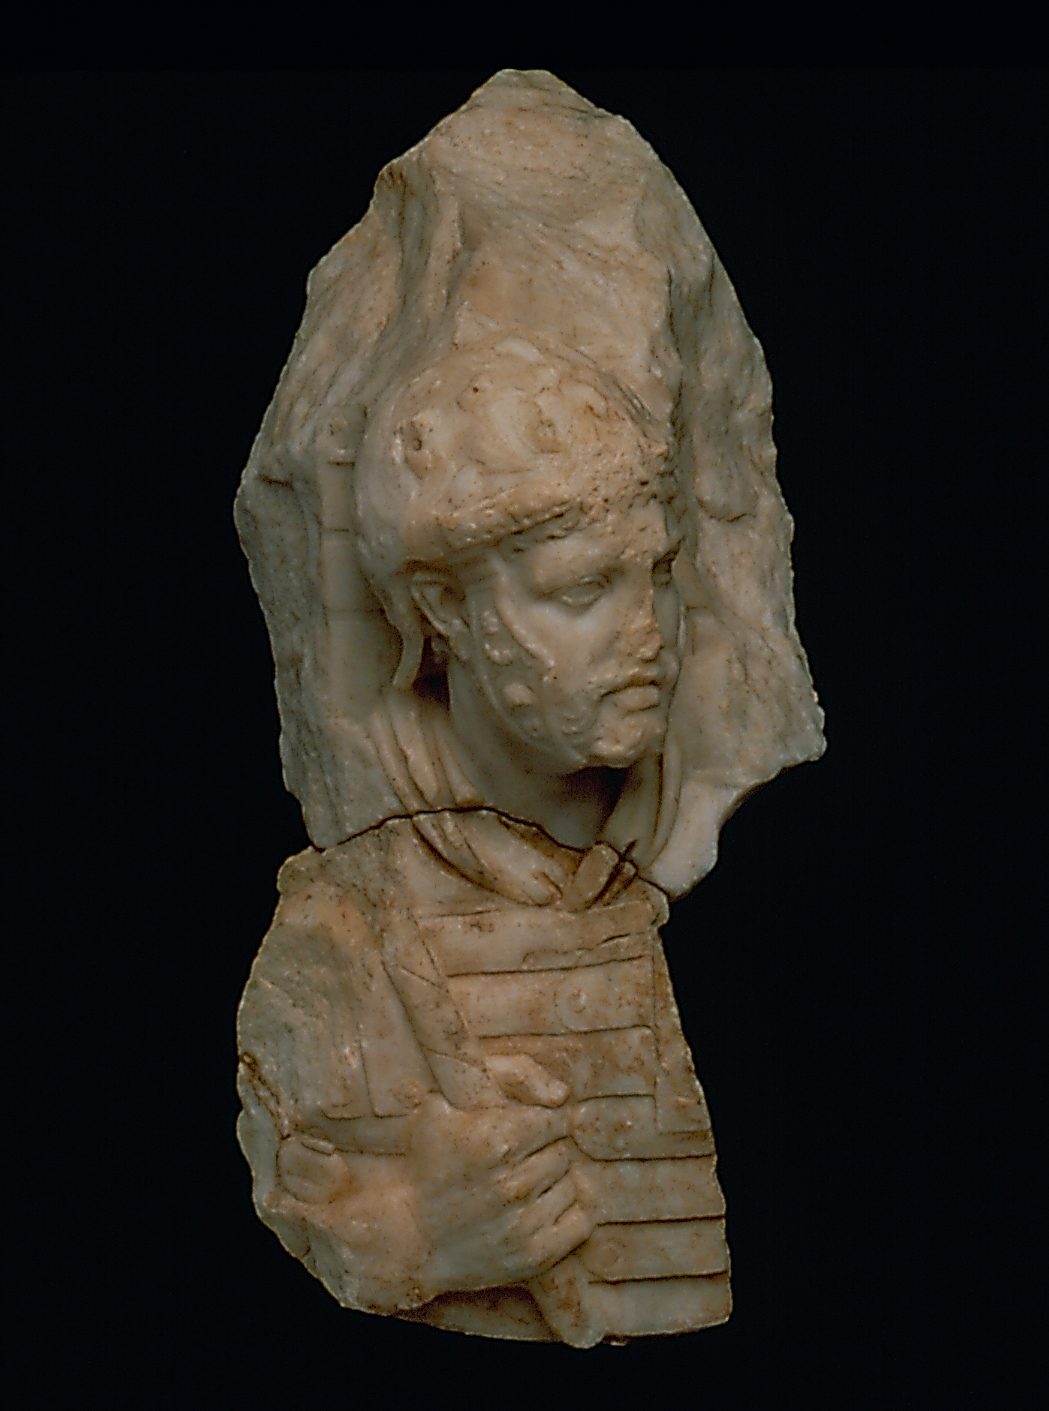 White marble relief figure of a helmeted head of a male soldier and a torso with a hand holding part of a spear. The head and torso are broken apart from one another. 